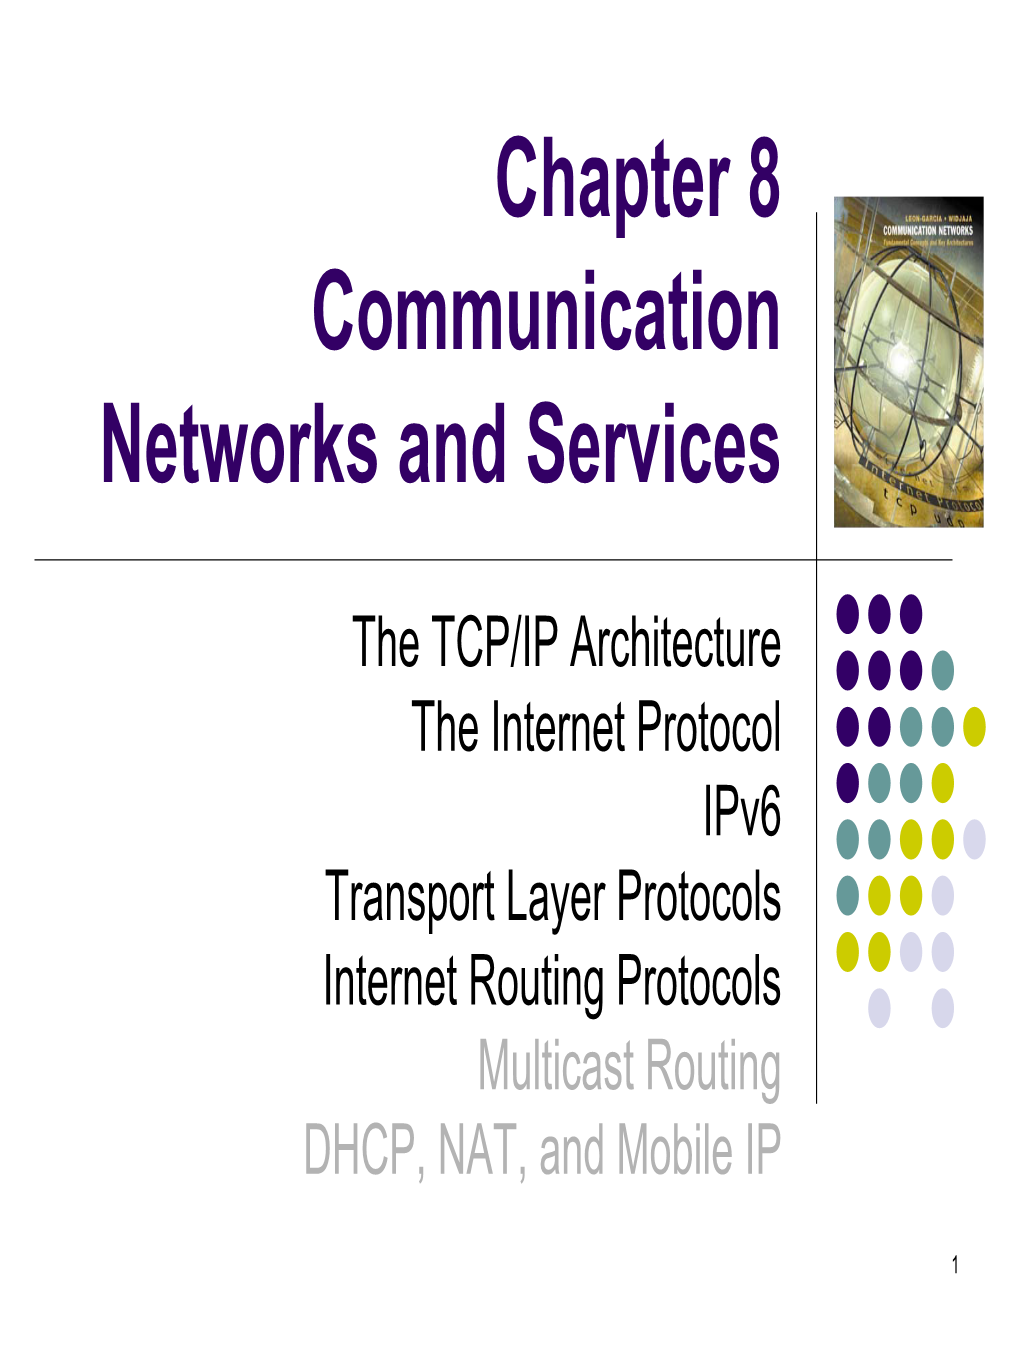 Chapter 8: TCP/IP